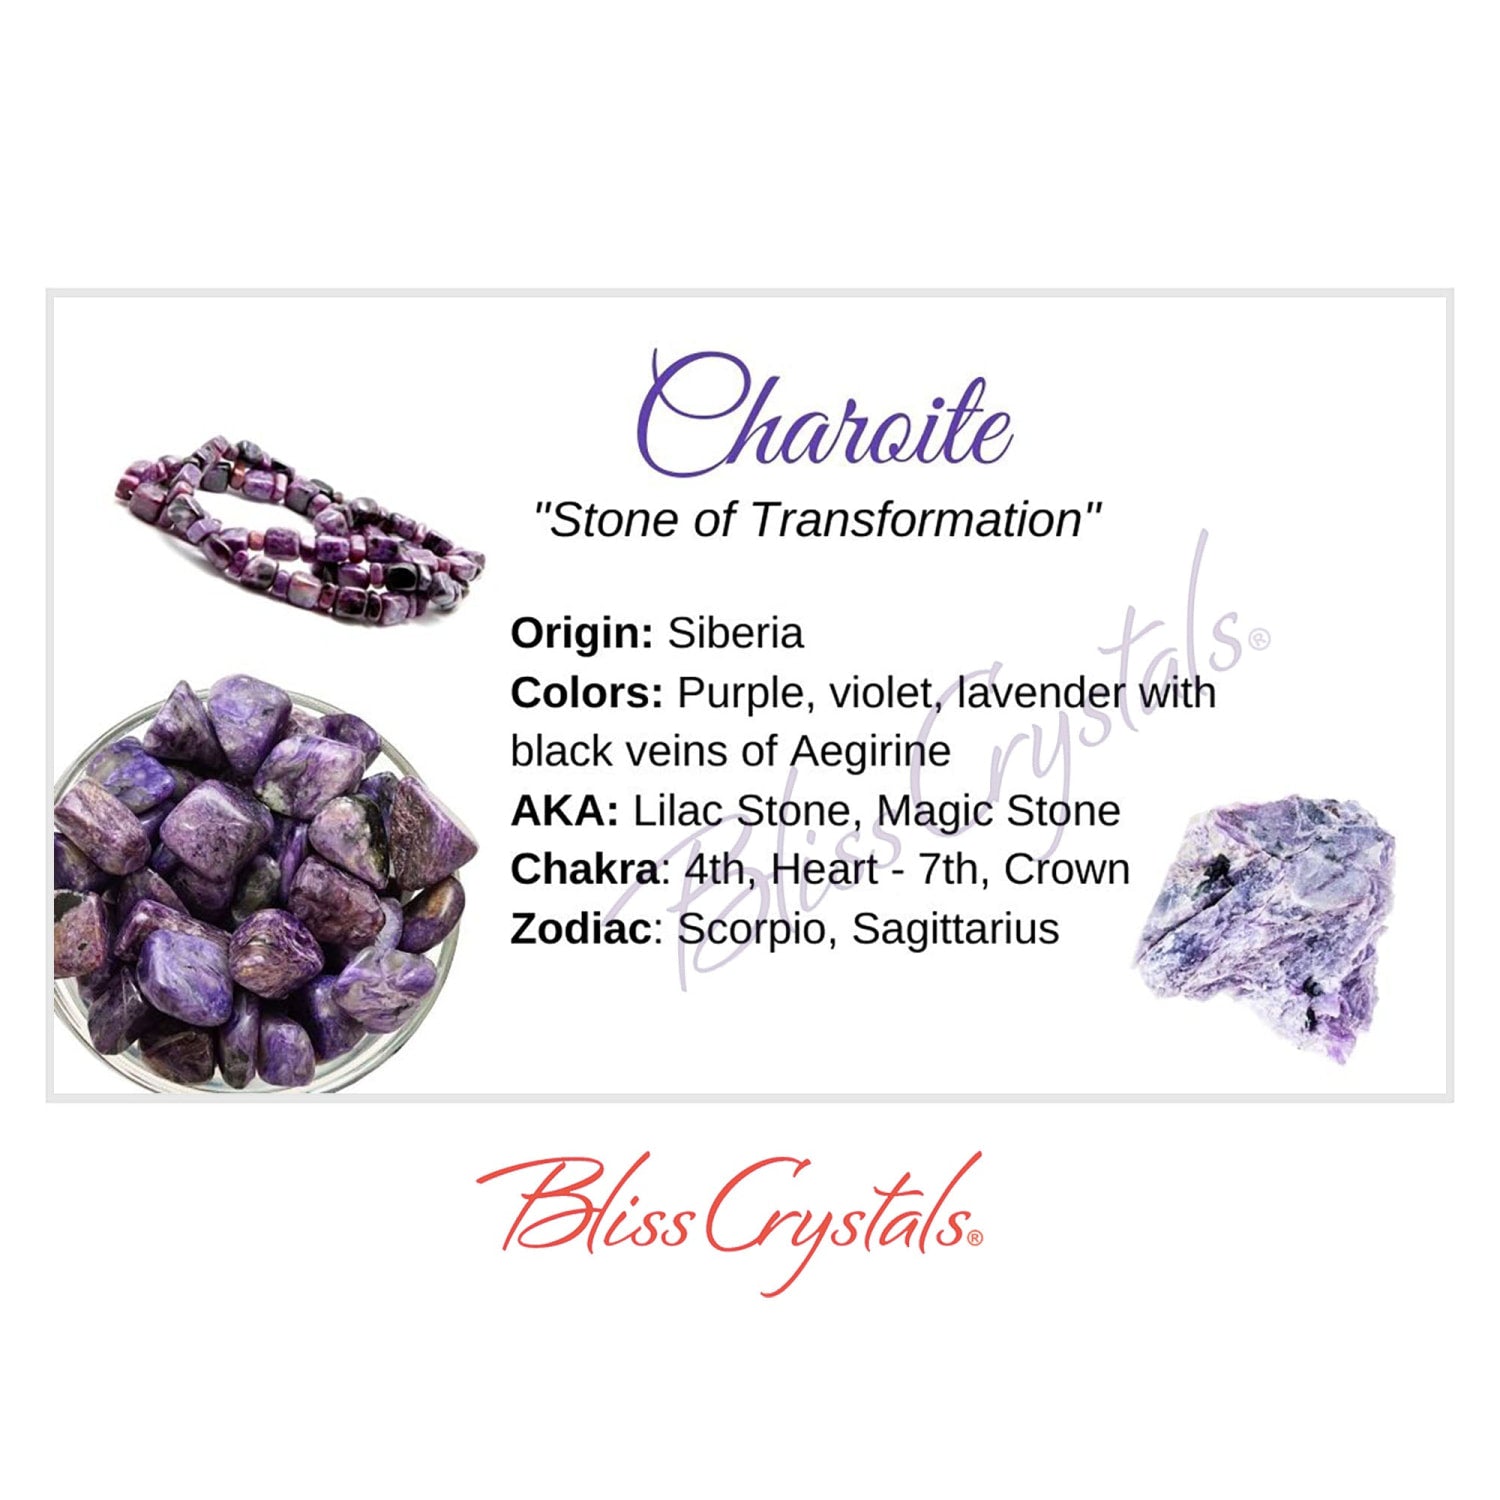 Bliss Crystals - CHAROITE Crystal Information Card Double